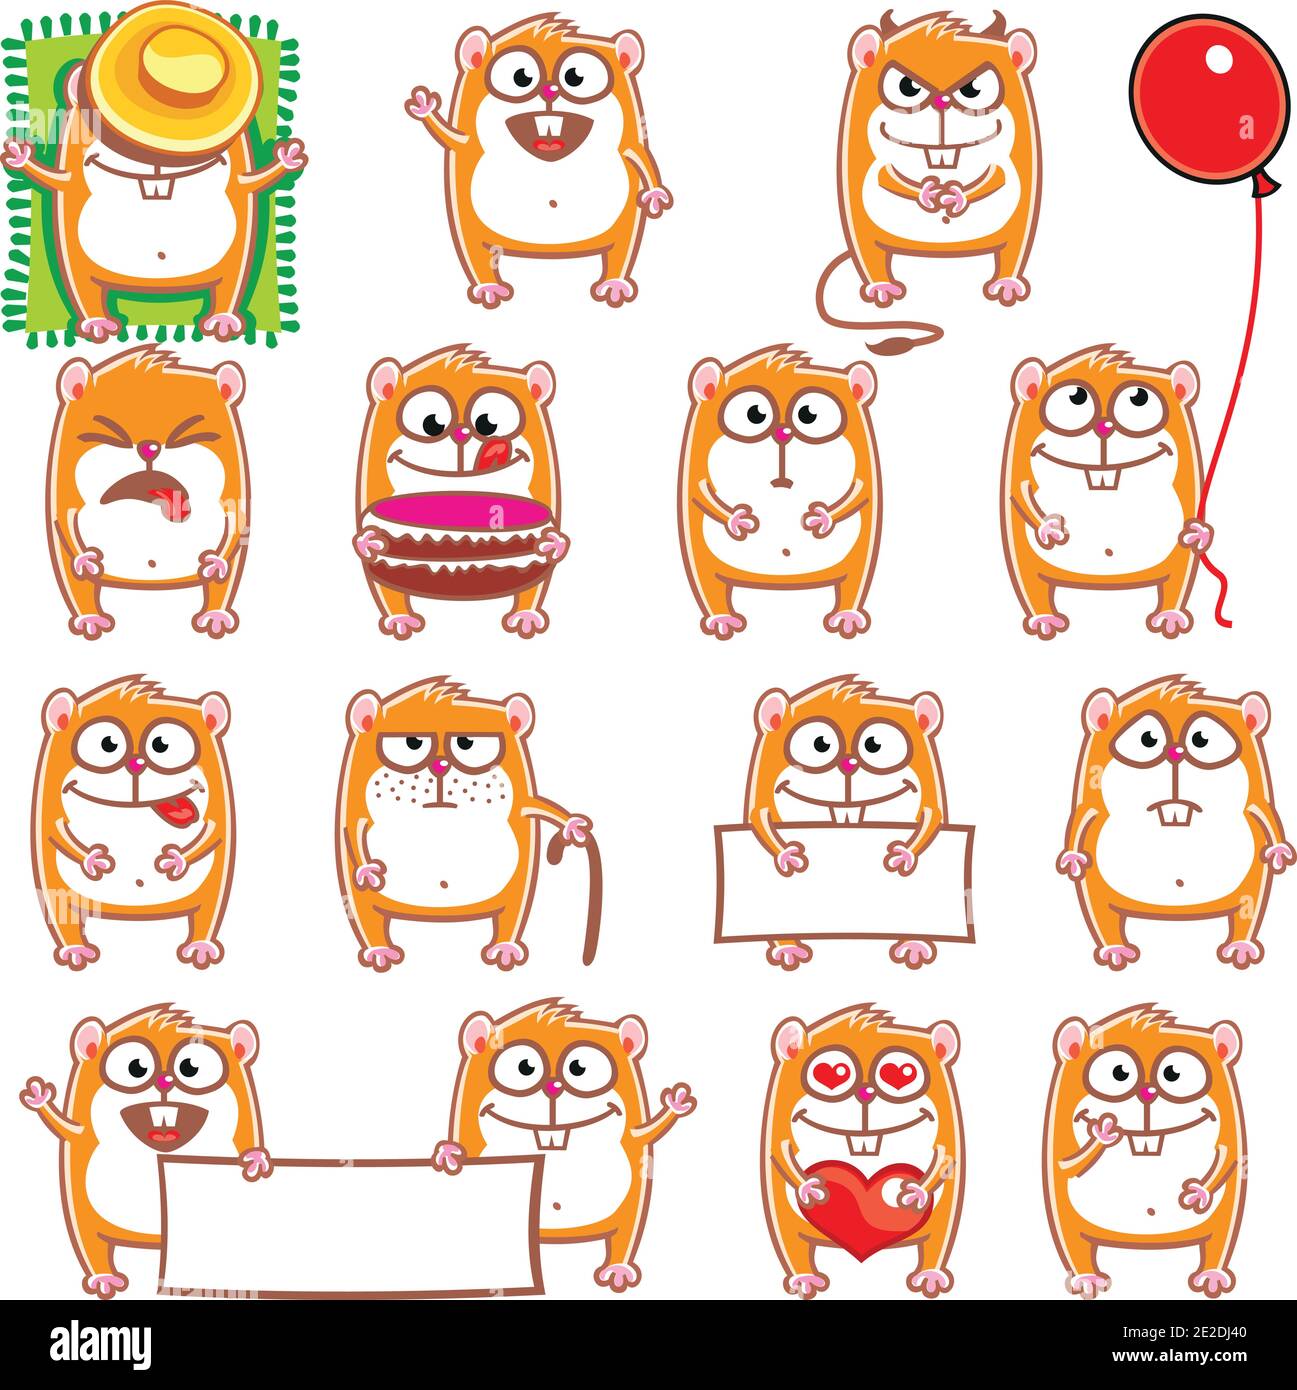 15 smiley hamsters individually grouped for easy copy-n-paste.(1) Stock Vector